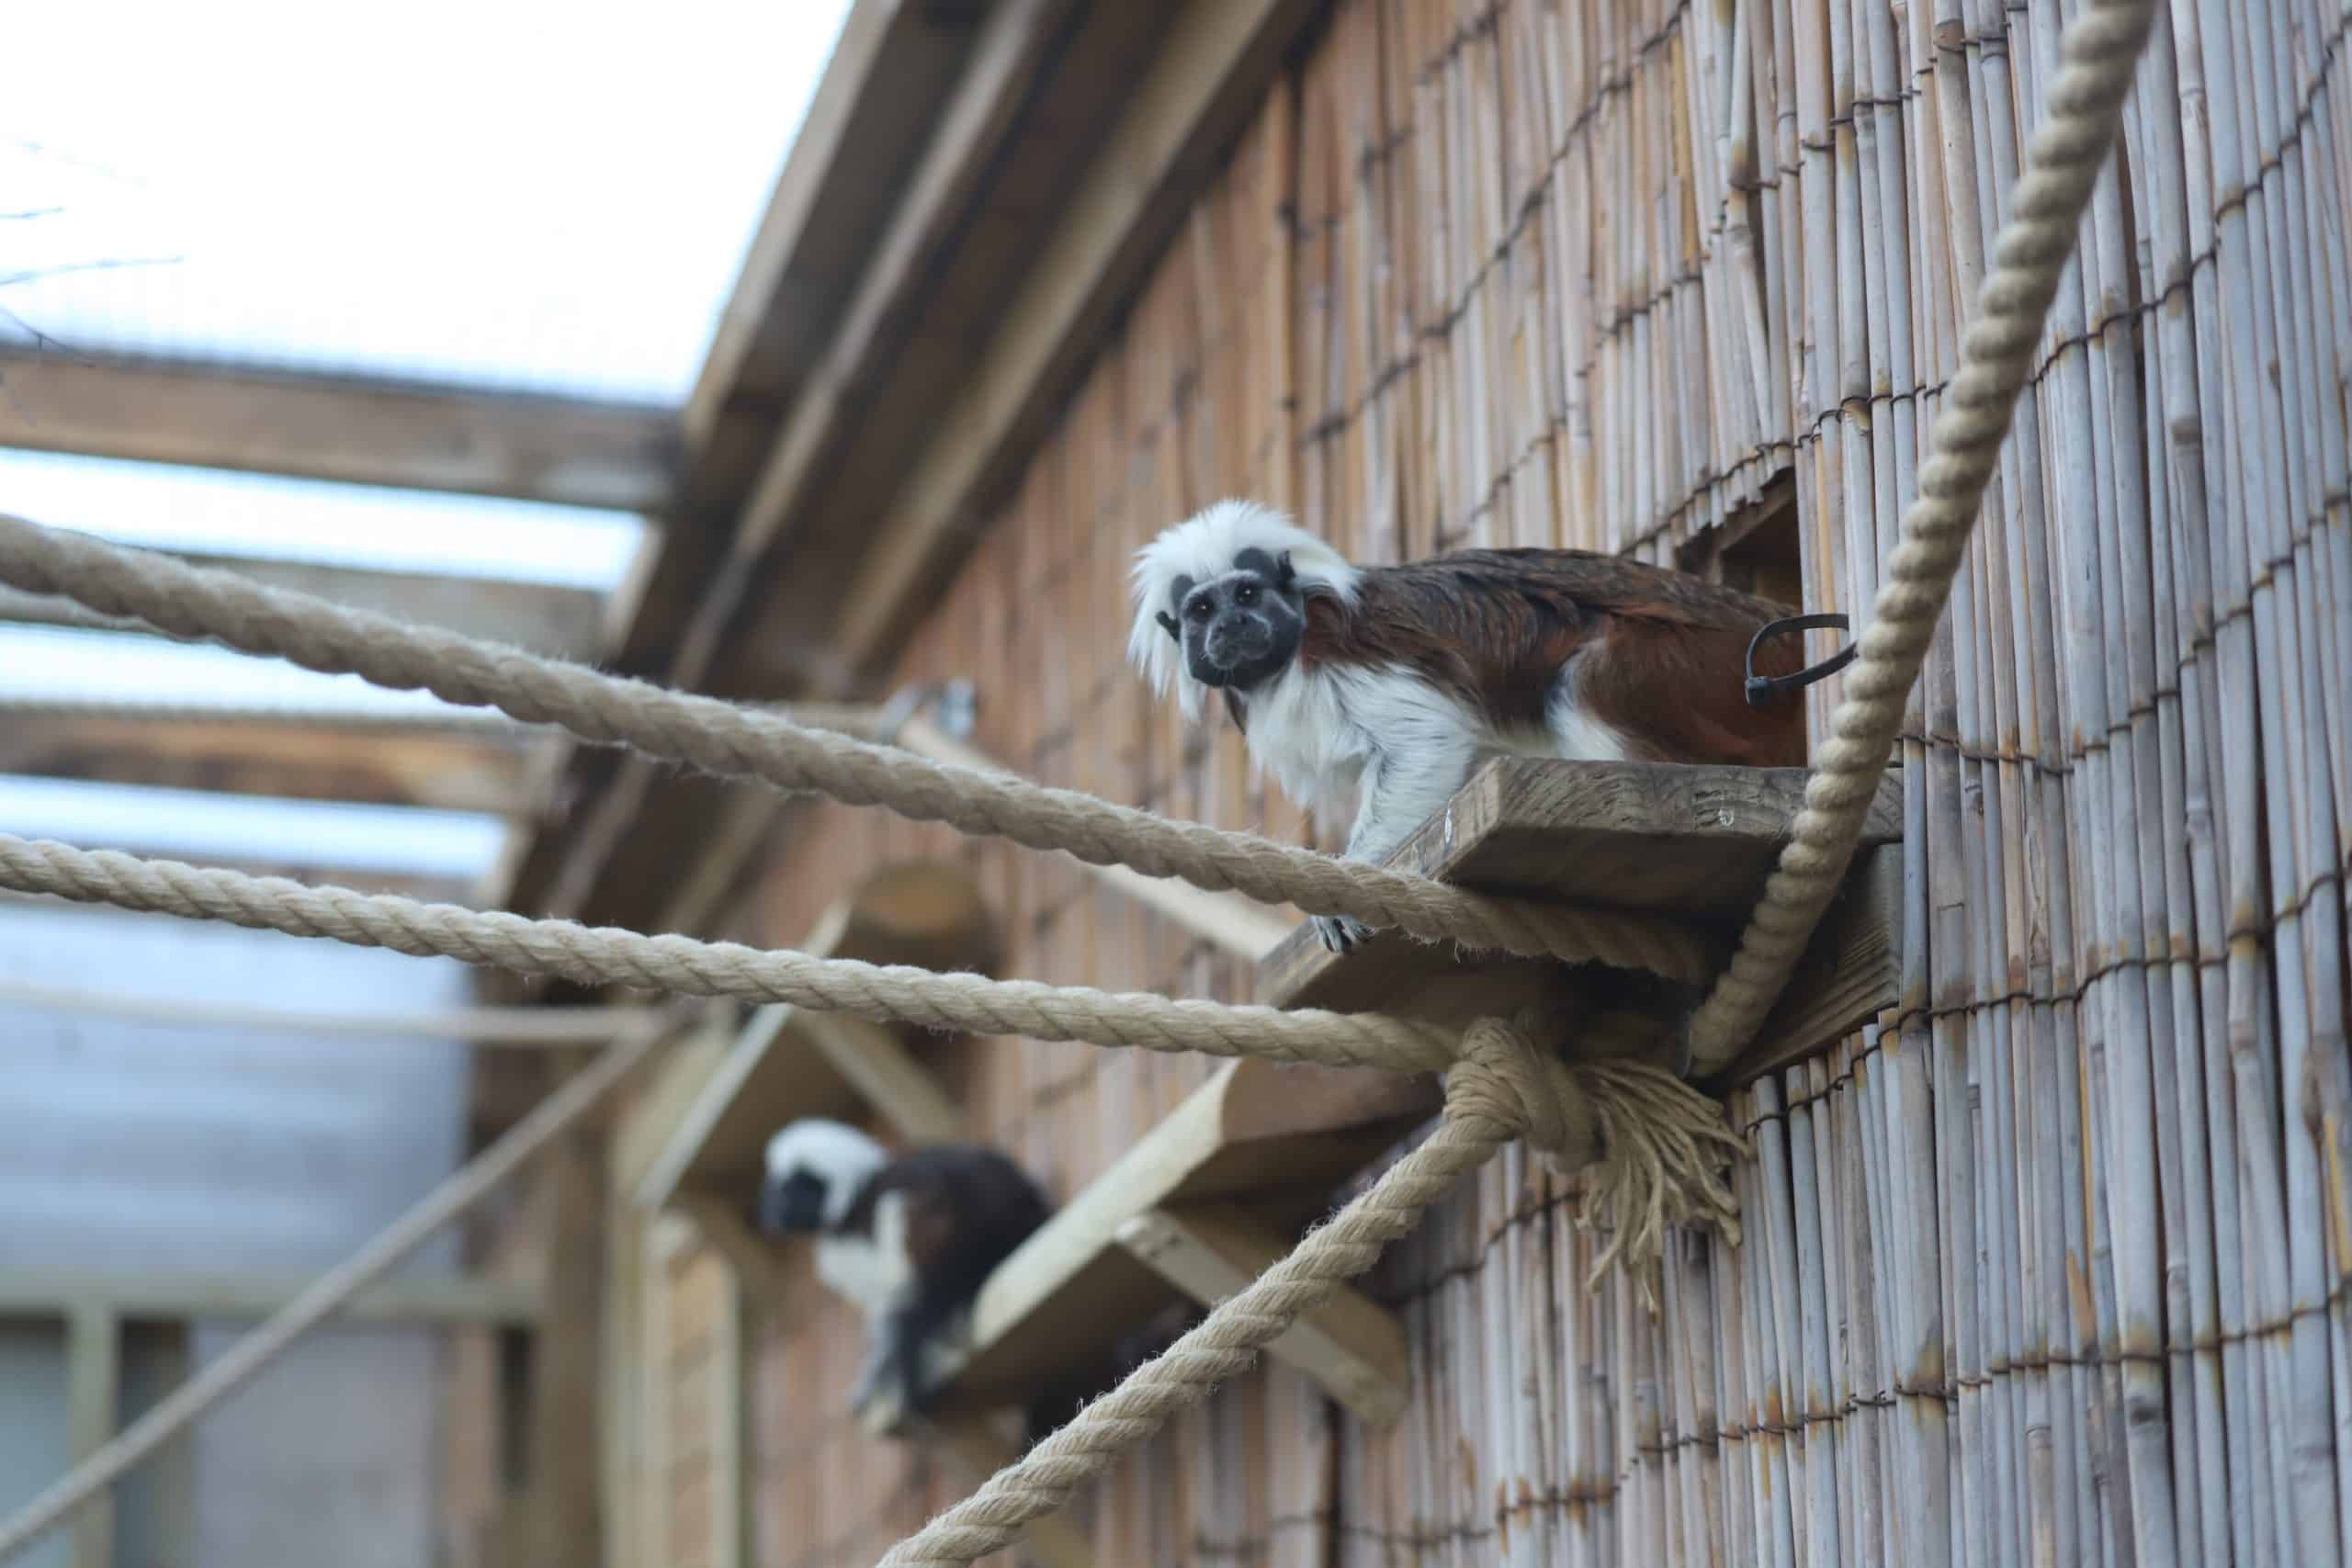 A pair of cotton-top tamarins at Newquay Zoo